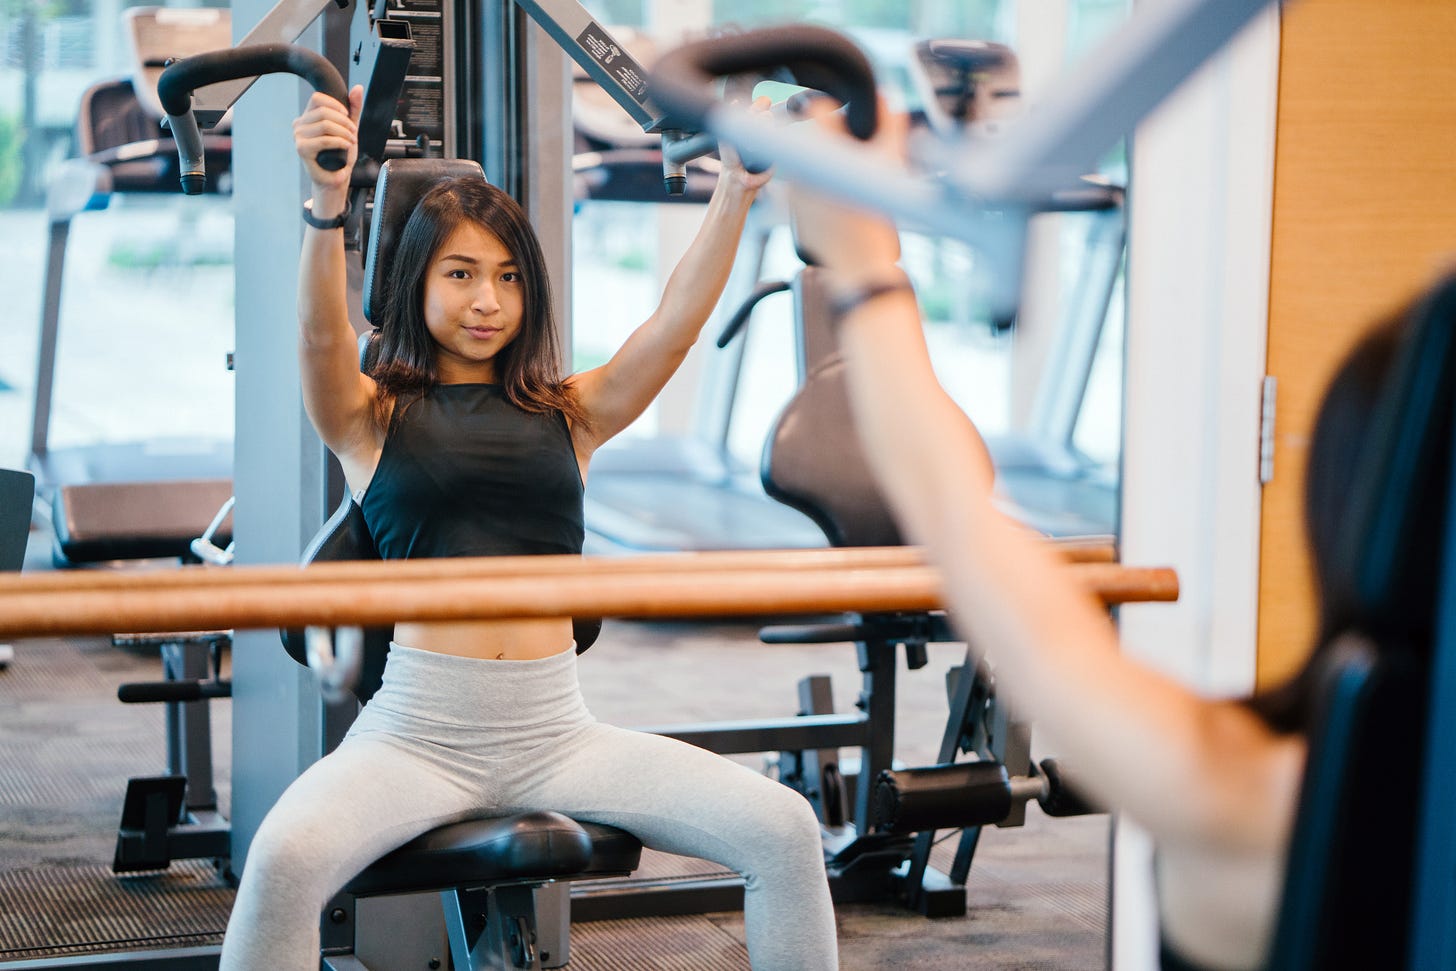 a woman working out on a gym machine